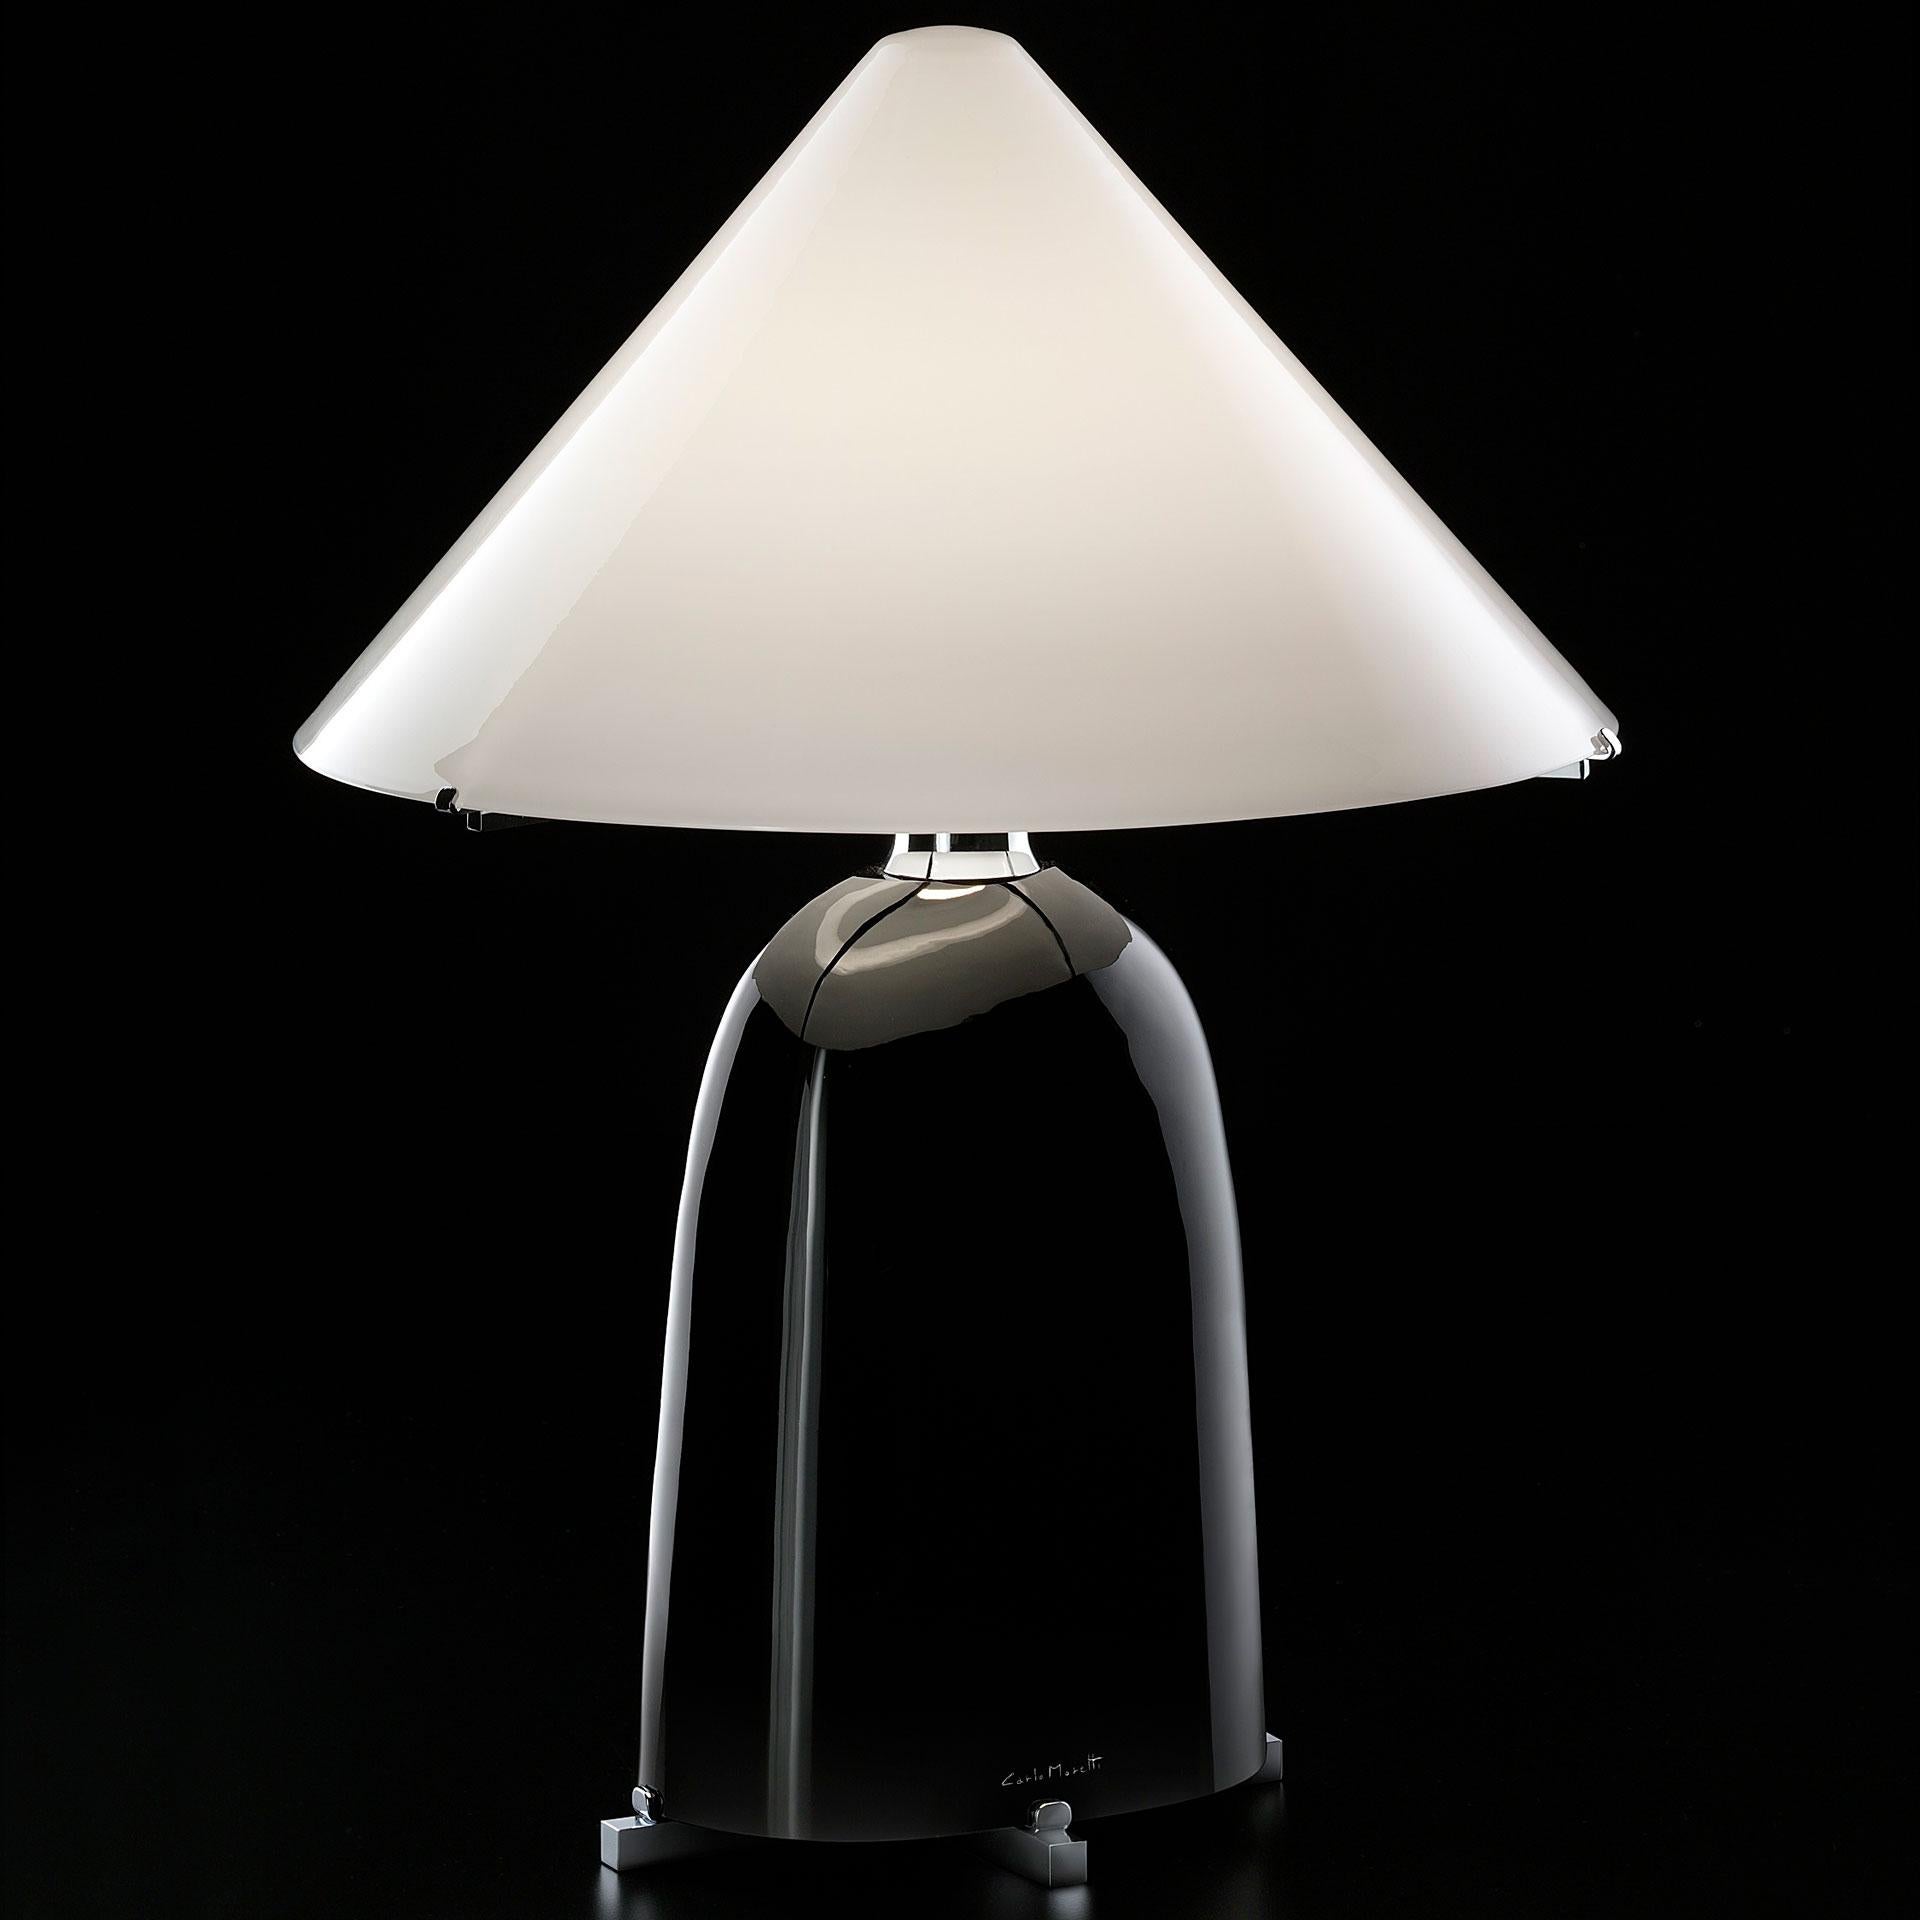 Chosen as one of Architectural Digest “best new lights, 2015”, Ovale is a table lamp of black mouth blown Murano glass and mouth blown Murano white opaline glass shade mounted on gilded metal. The lamp was designed in 1983 by Carlo Moretti.